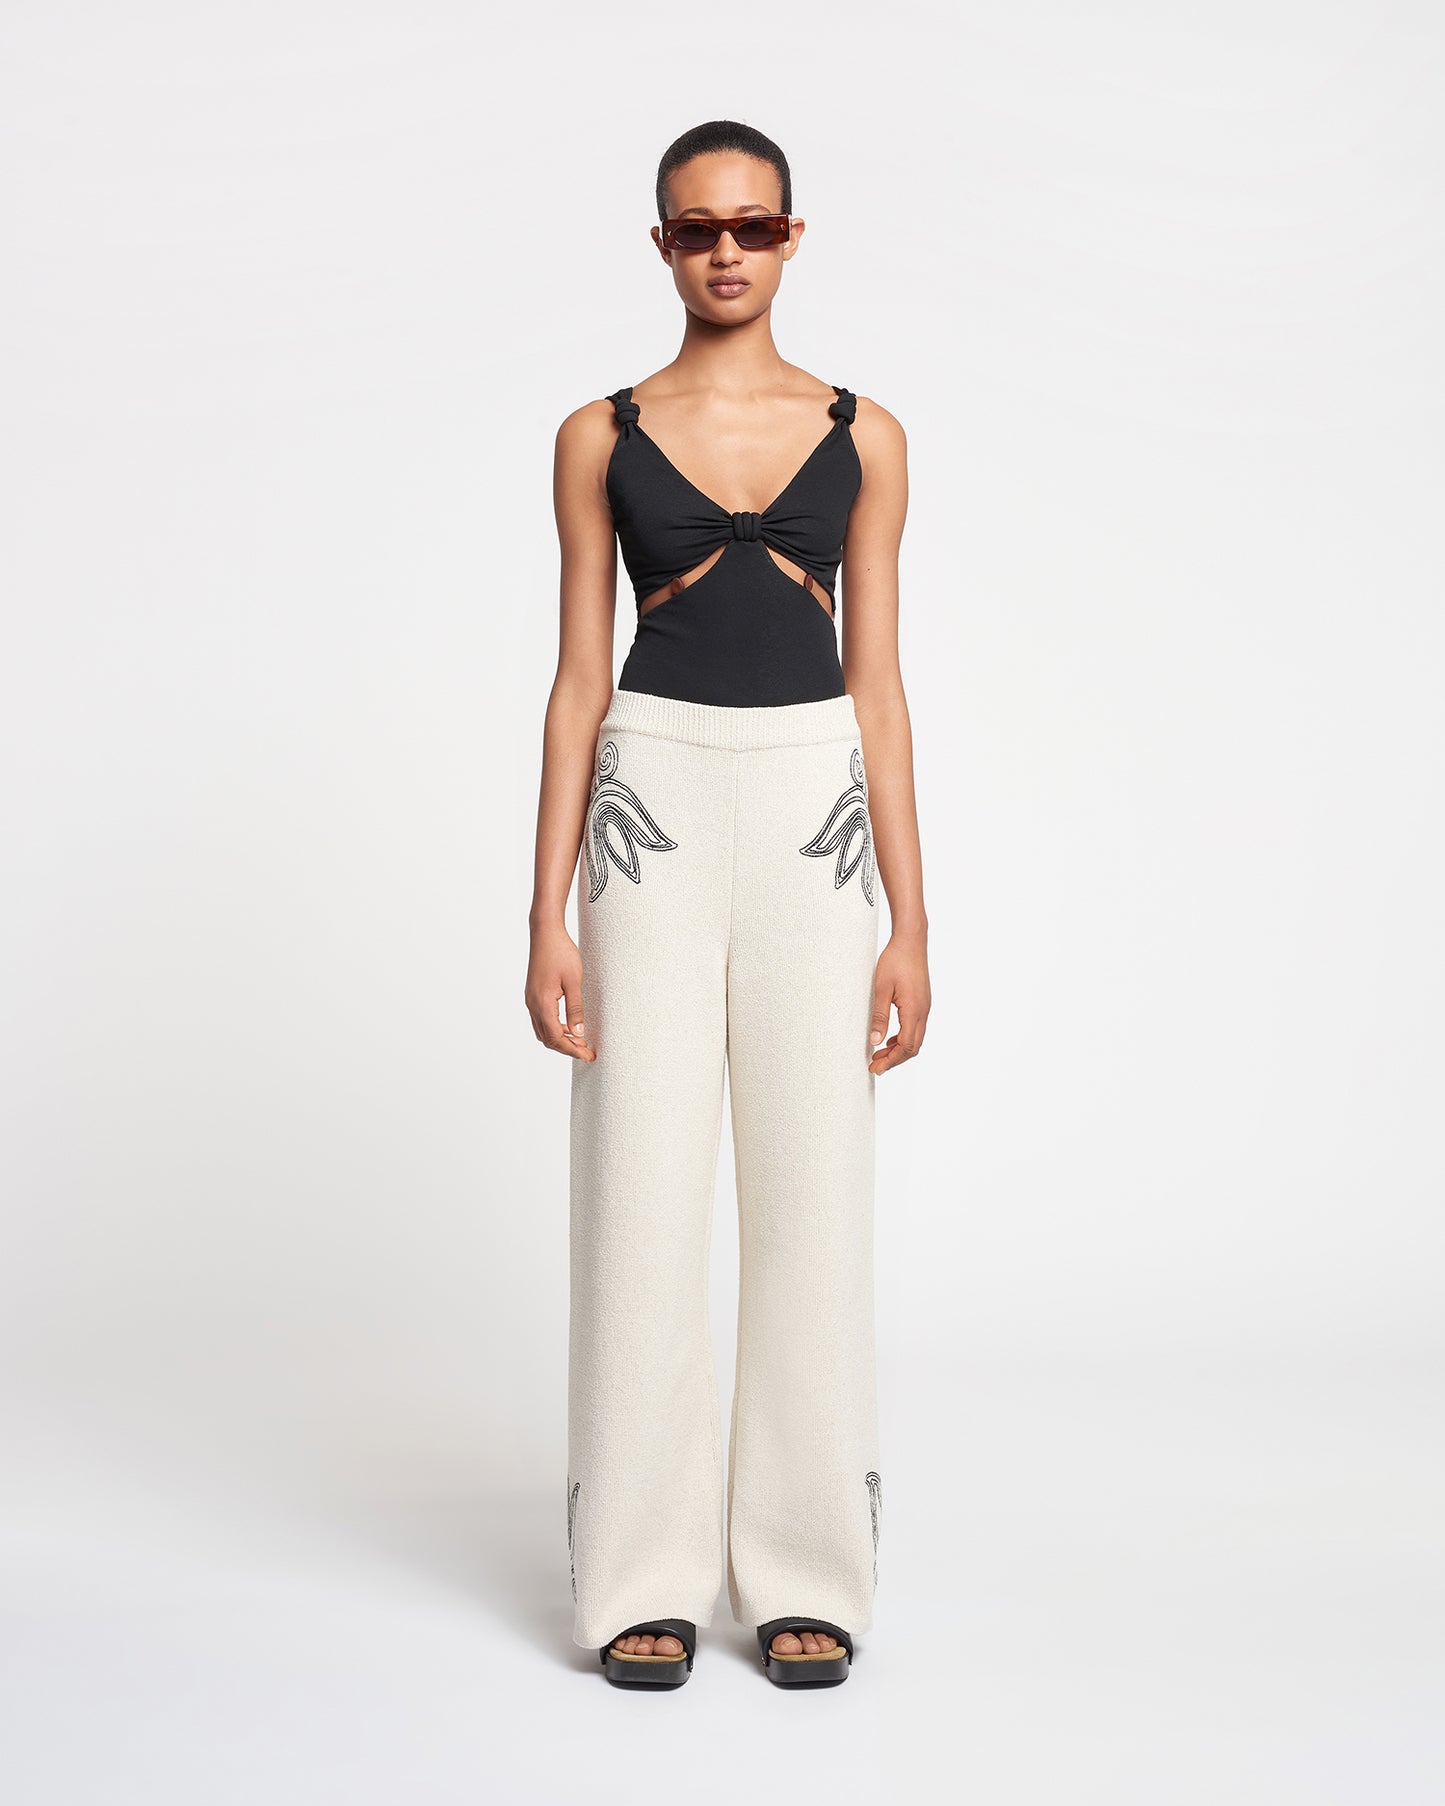 Emmie - Embroidered Textured-Linen Pants - Natural/Black